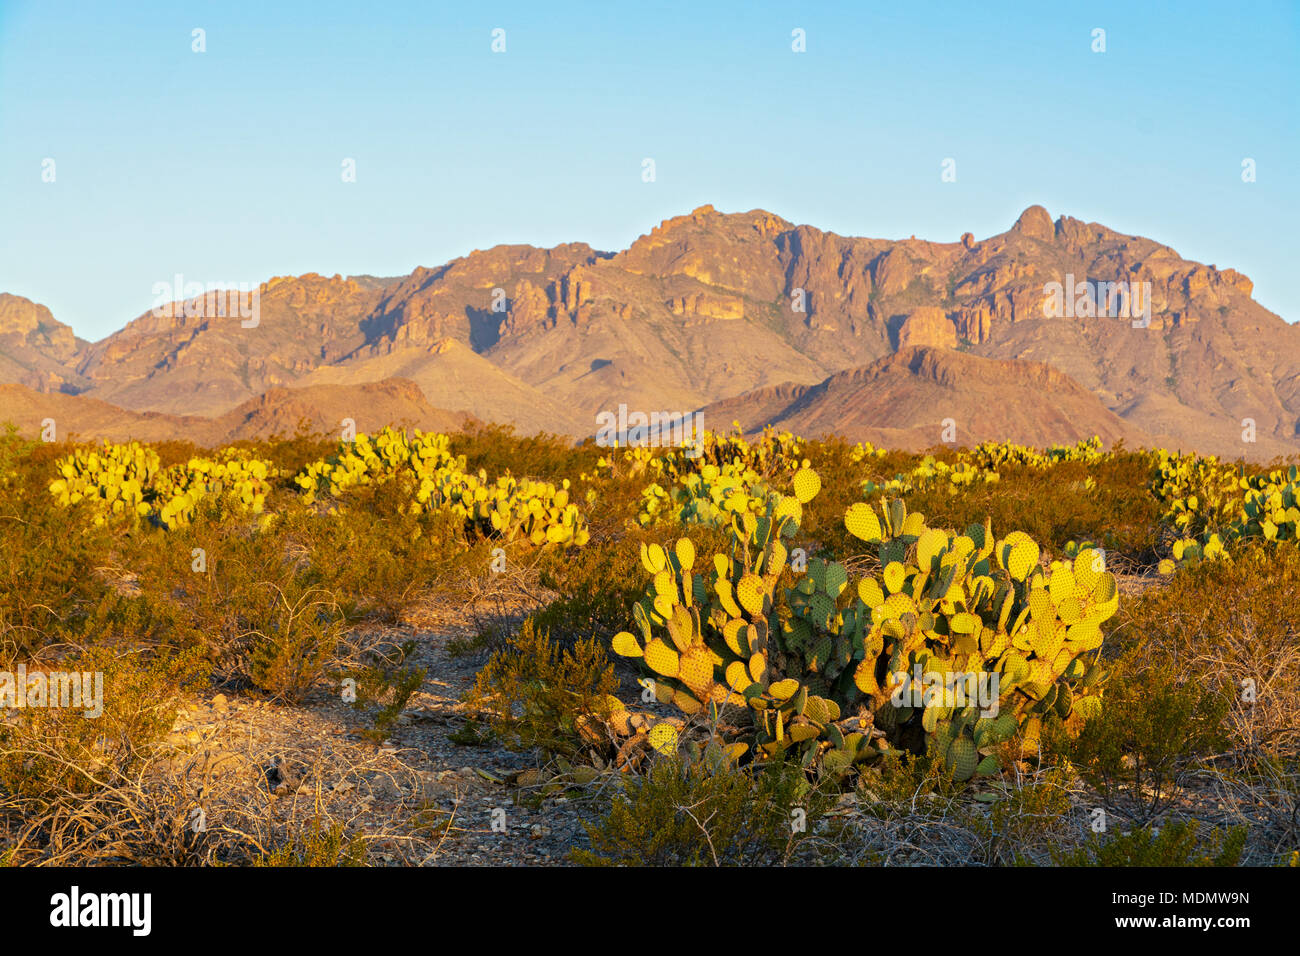 Texas, Big Bend National Park, Dugout Wells, Chihuahuan Desert Nature Trail, cactus, Chisos Mountains Stock Photo